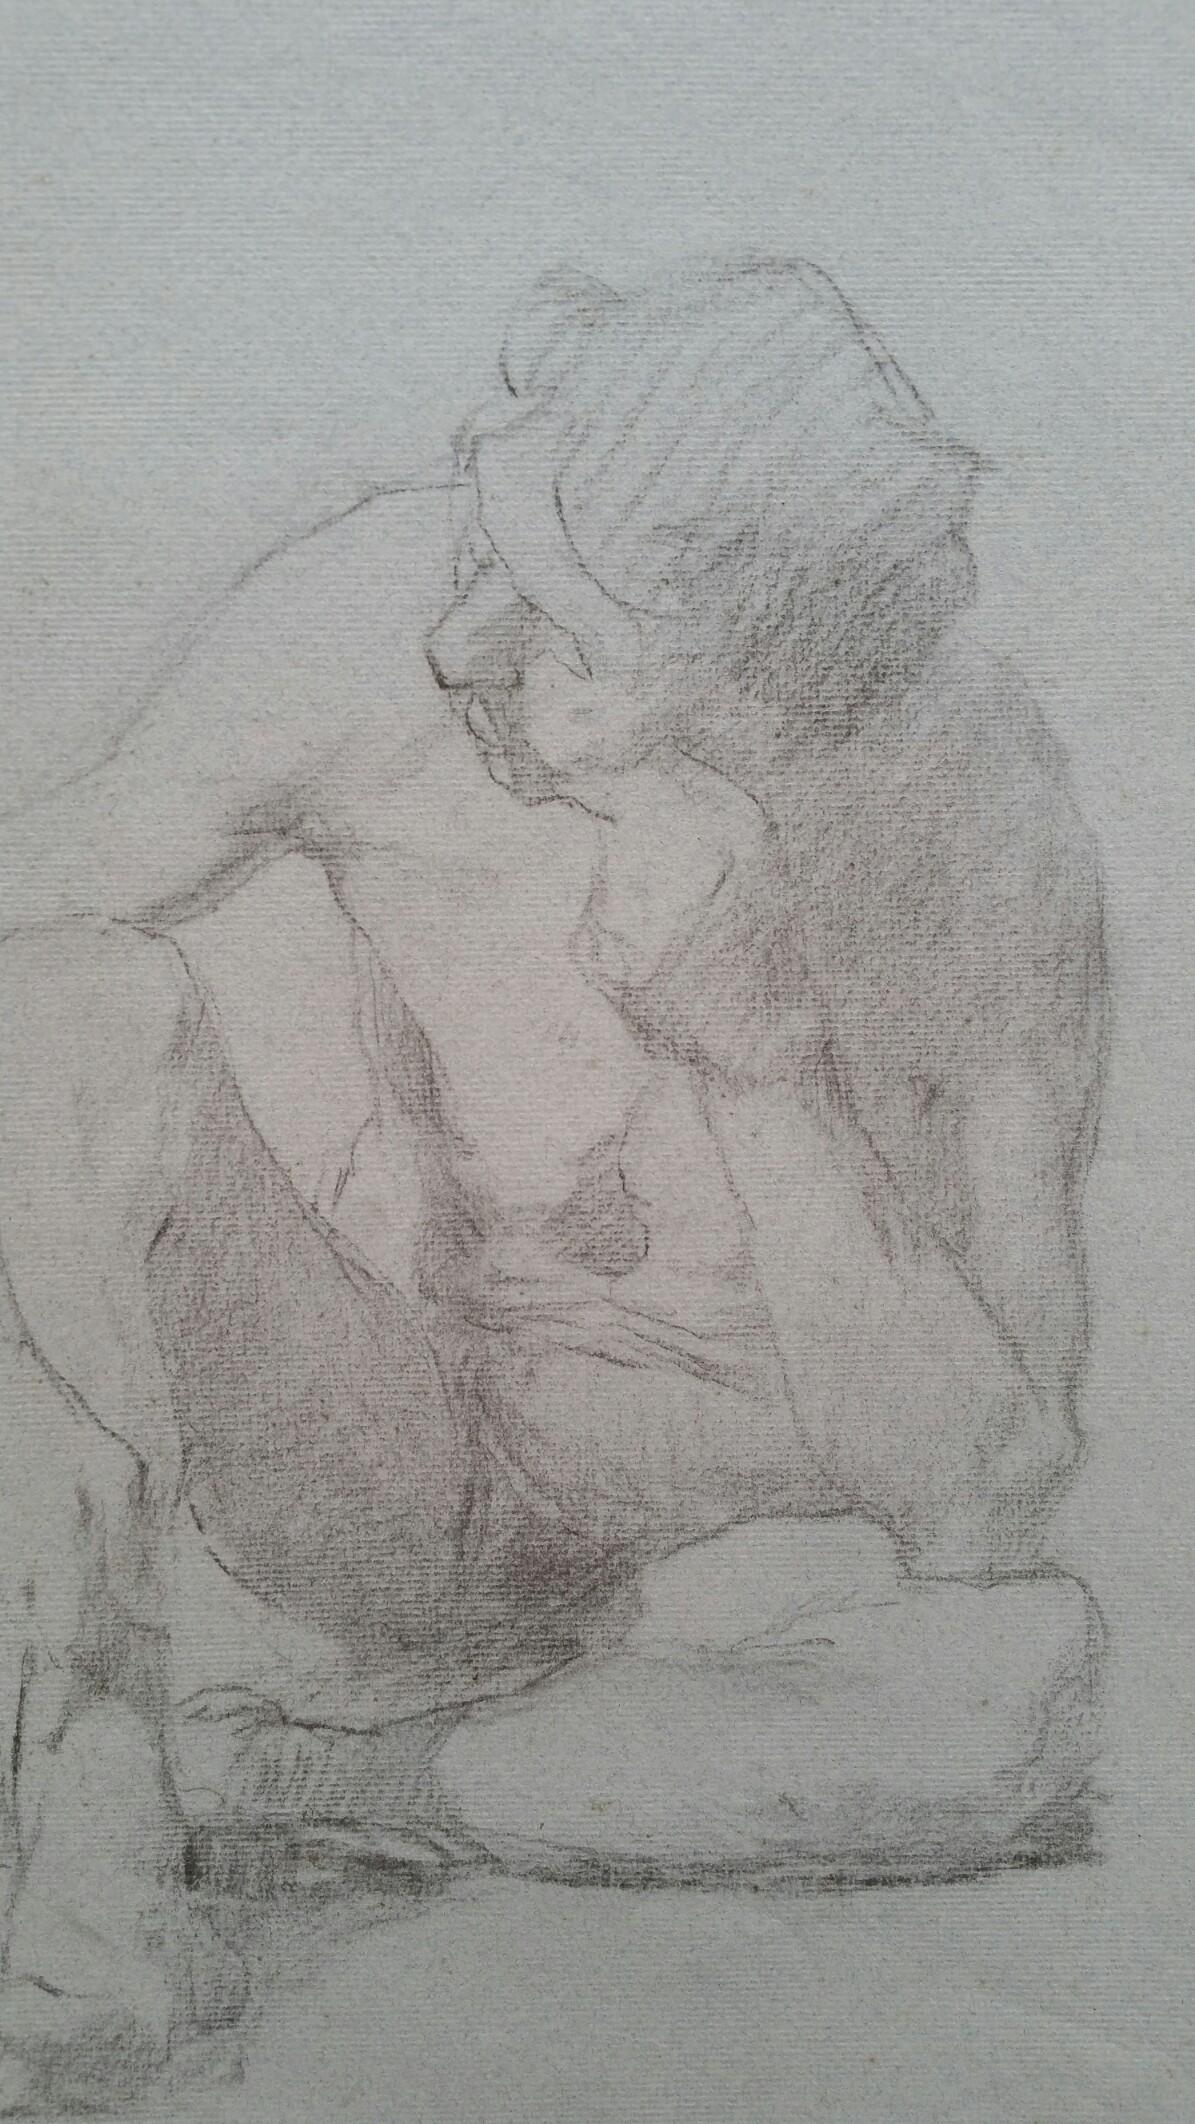 English Graphite Sketch of a Male Nude, Seated
by Henry George Moon (British 1857-1905)
on pale grey artists paper, unframed
measurements: sheet 18.75 x 12 inches

provenance: from the artists estate

Condition report: pin holes to corners where it